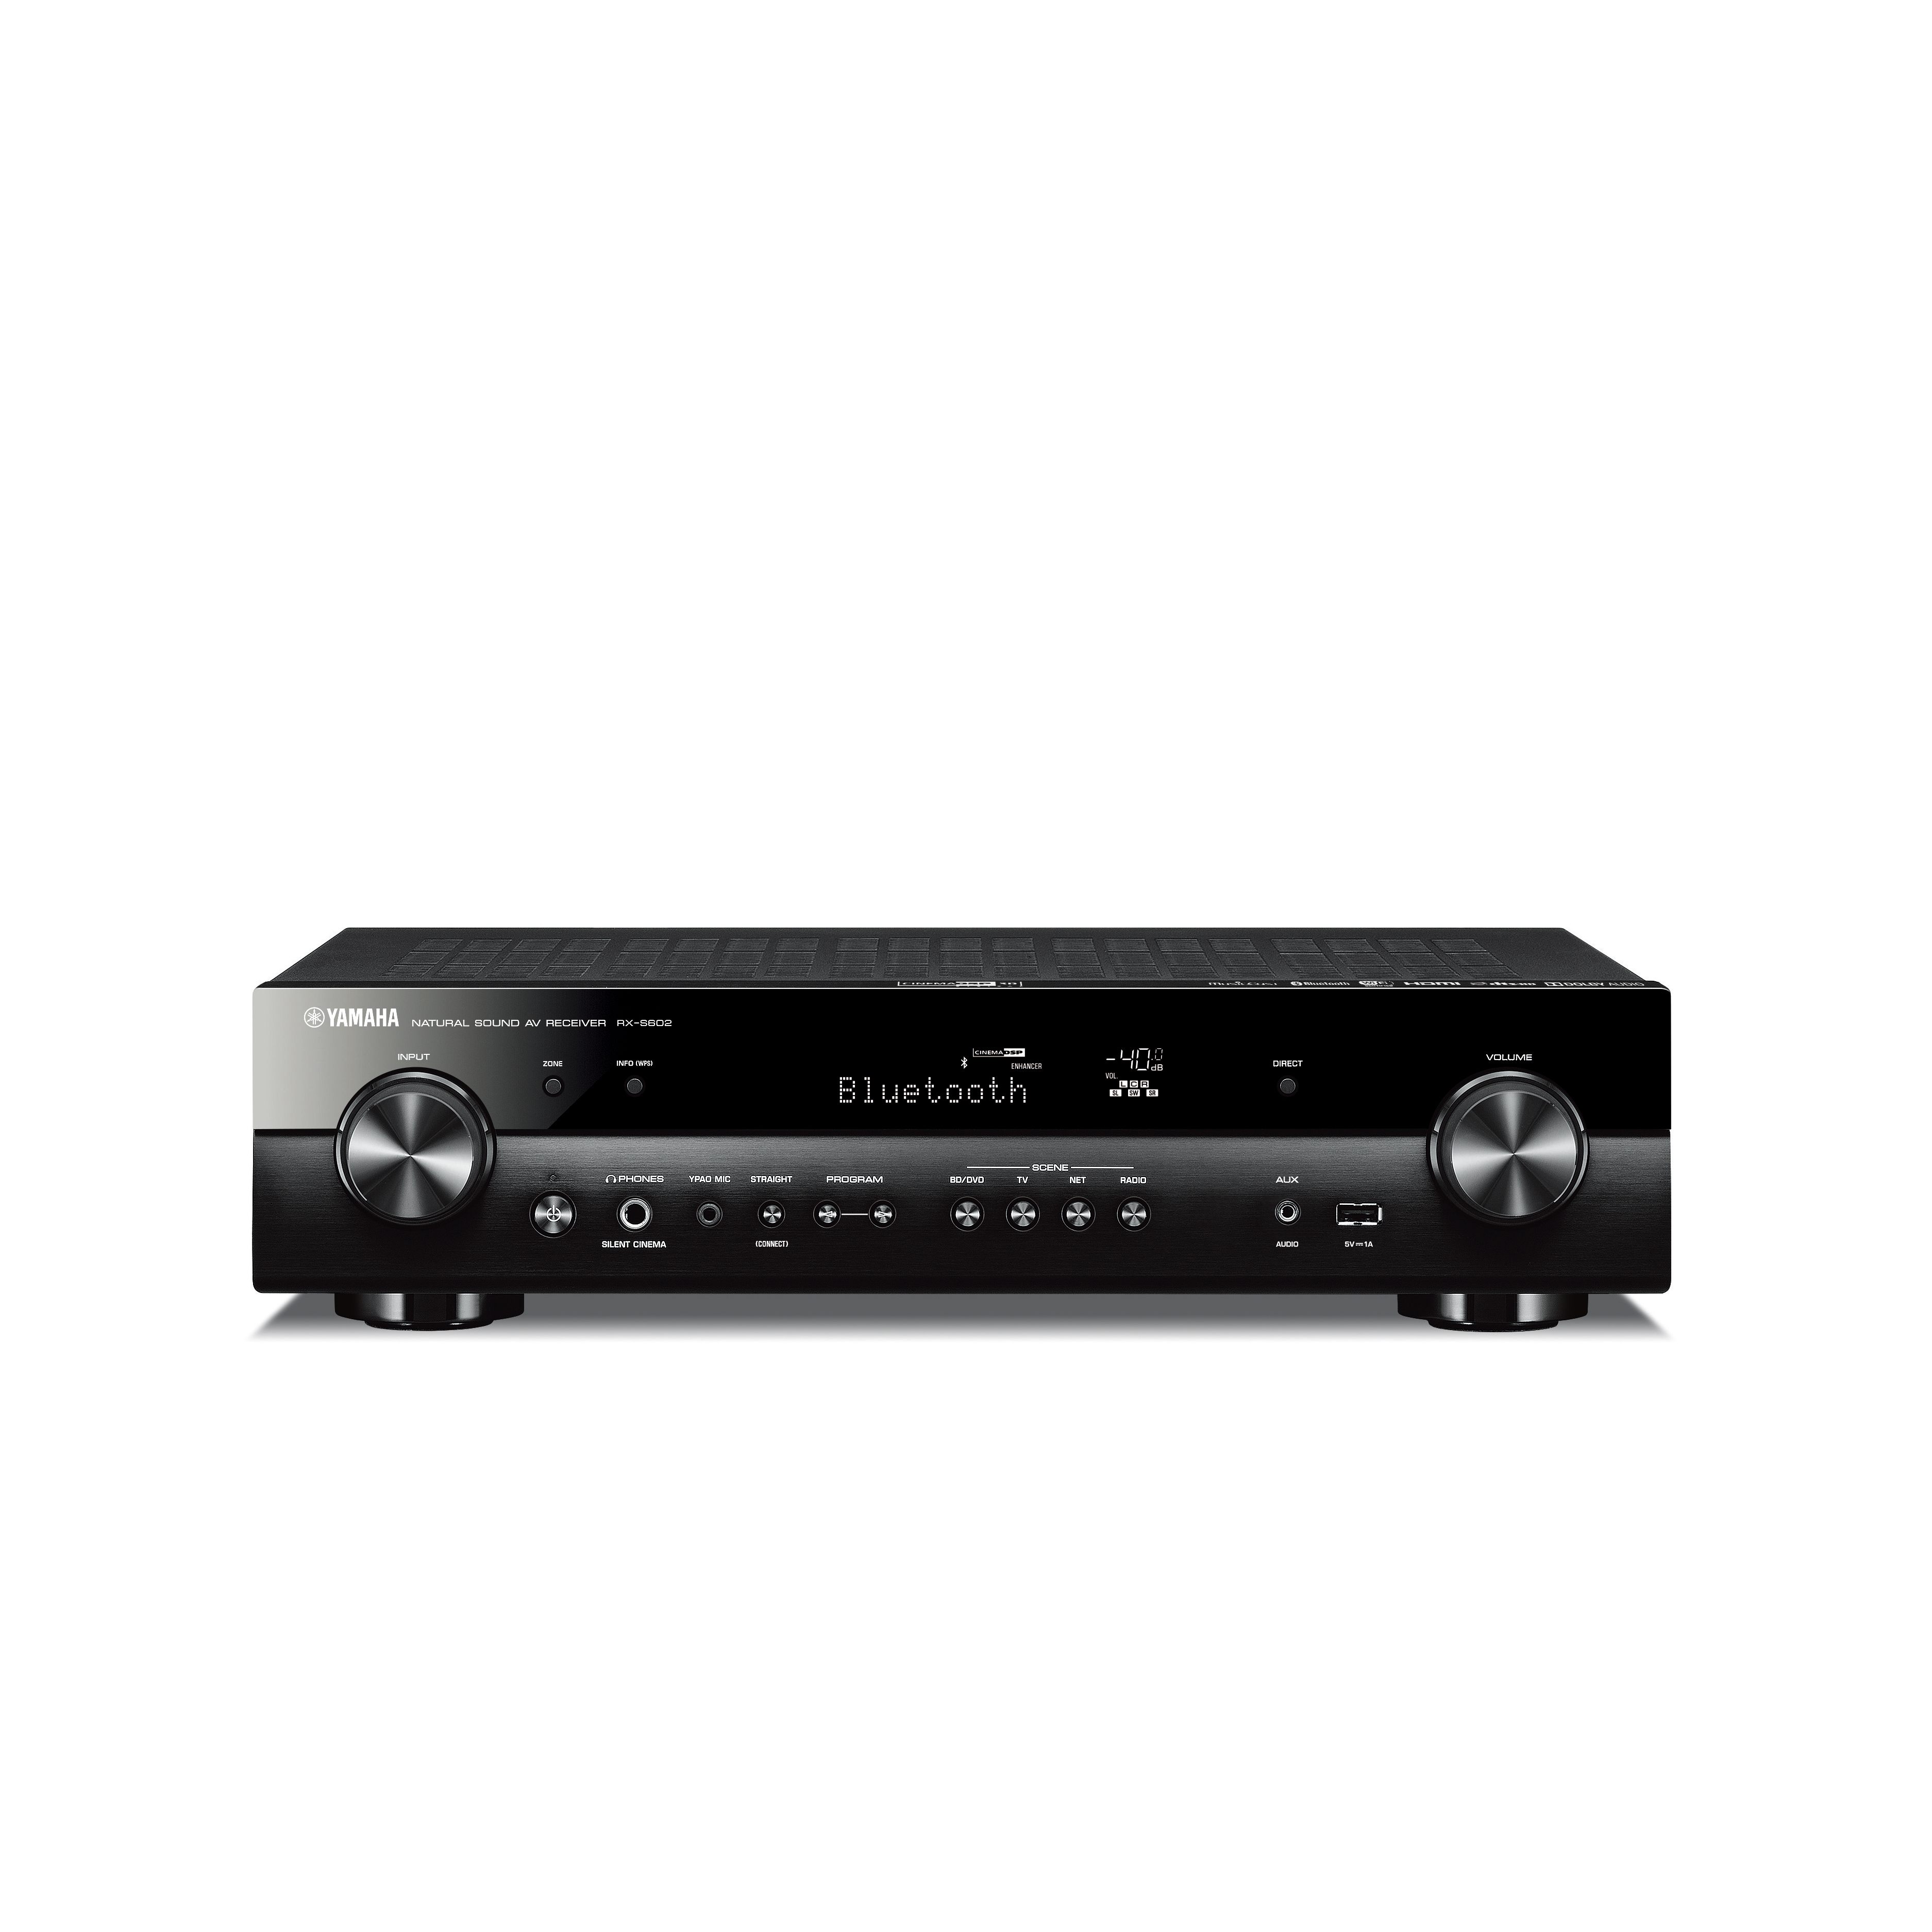 RX-S602 - Specs - AV Receivers - Audio & Visual - Products